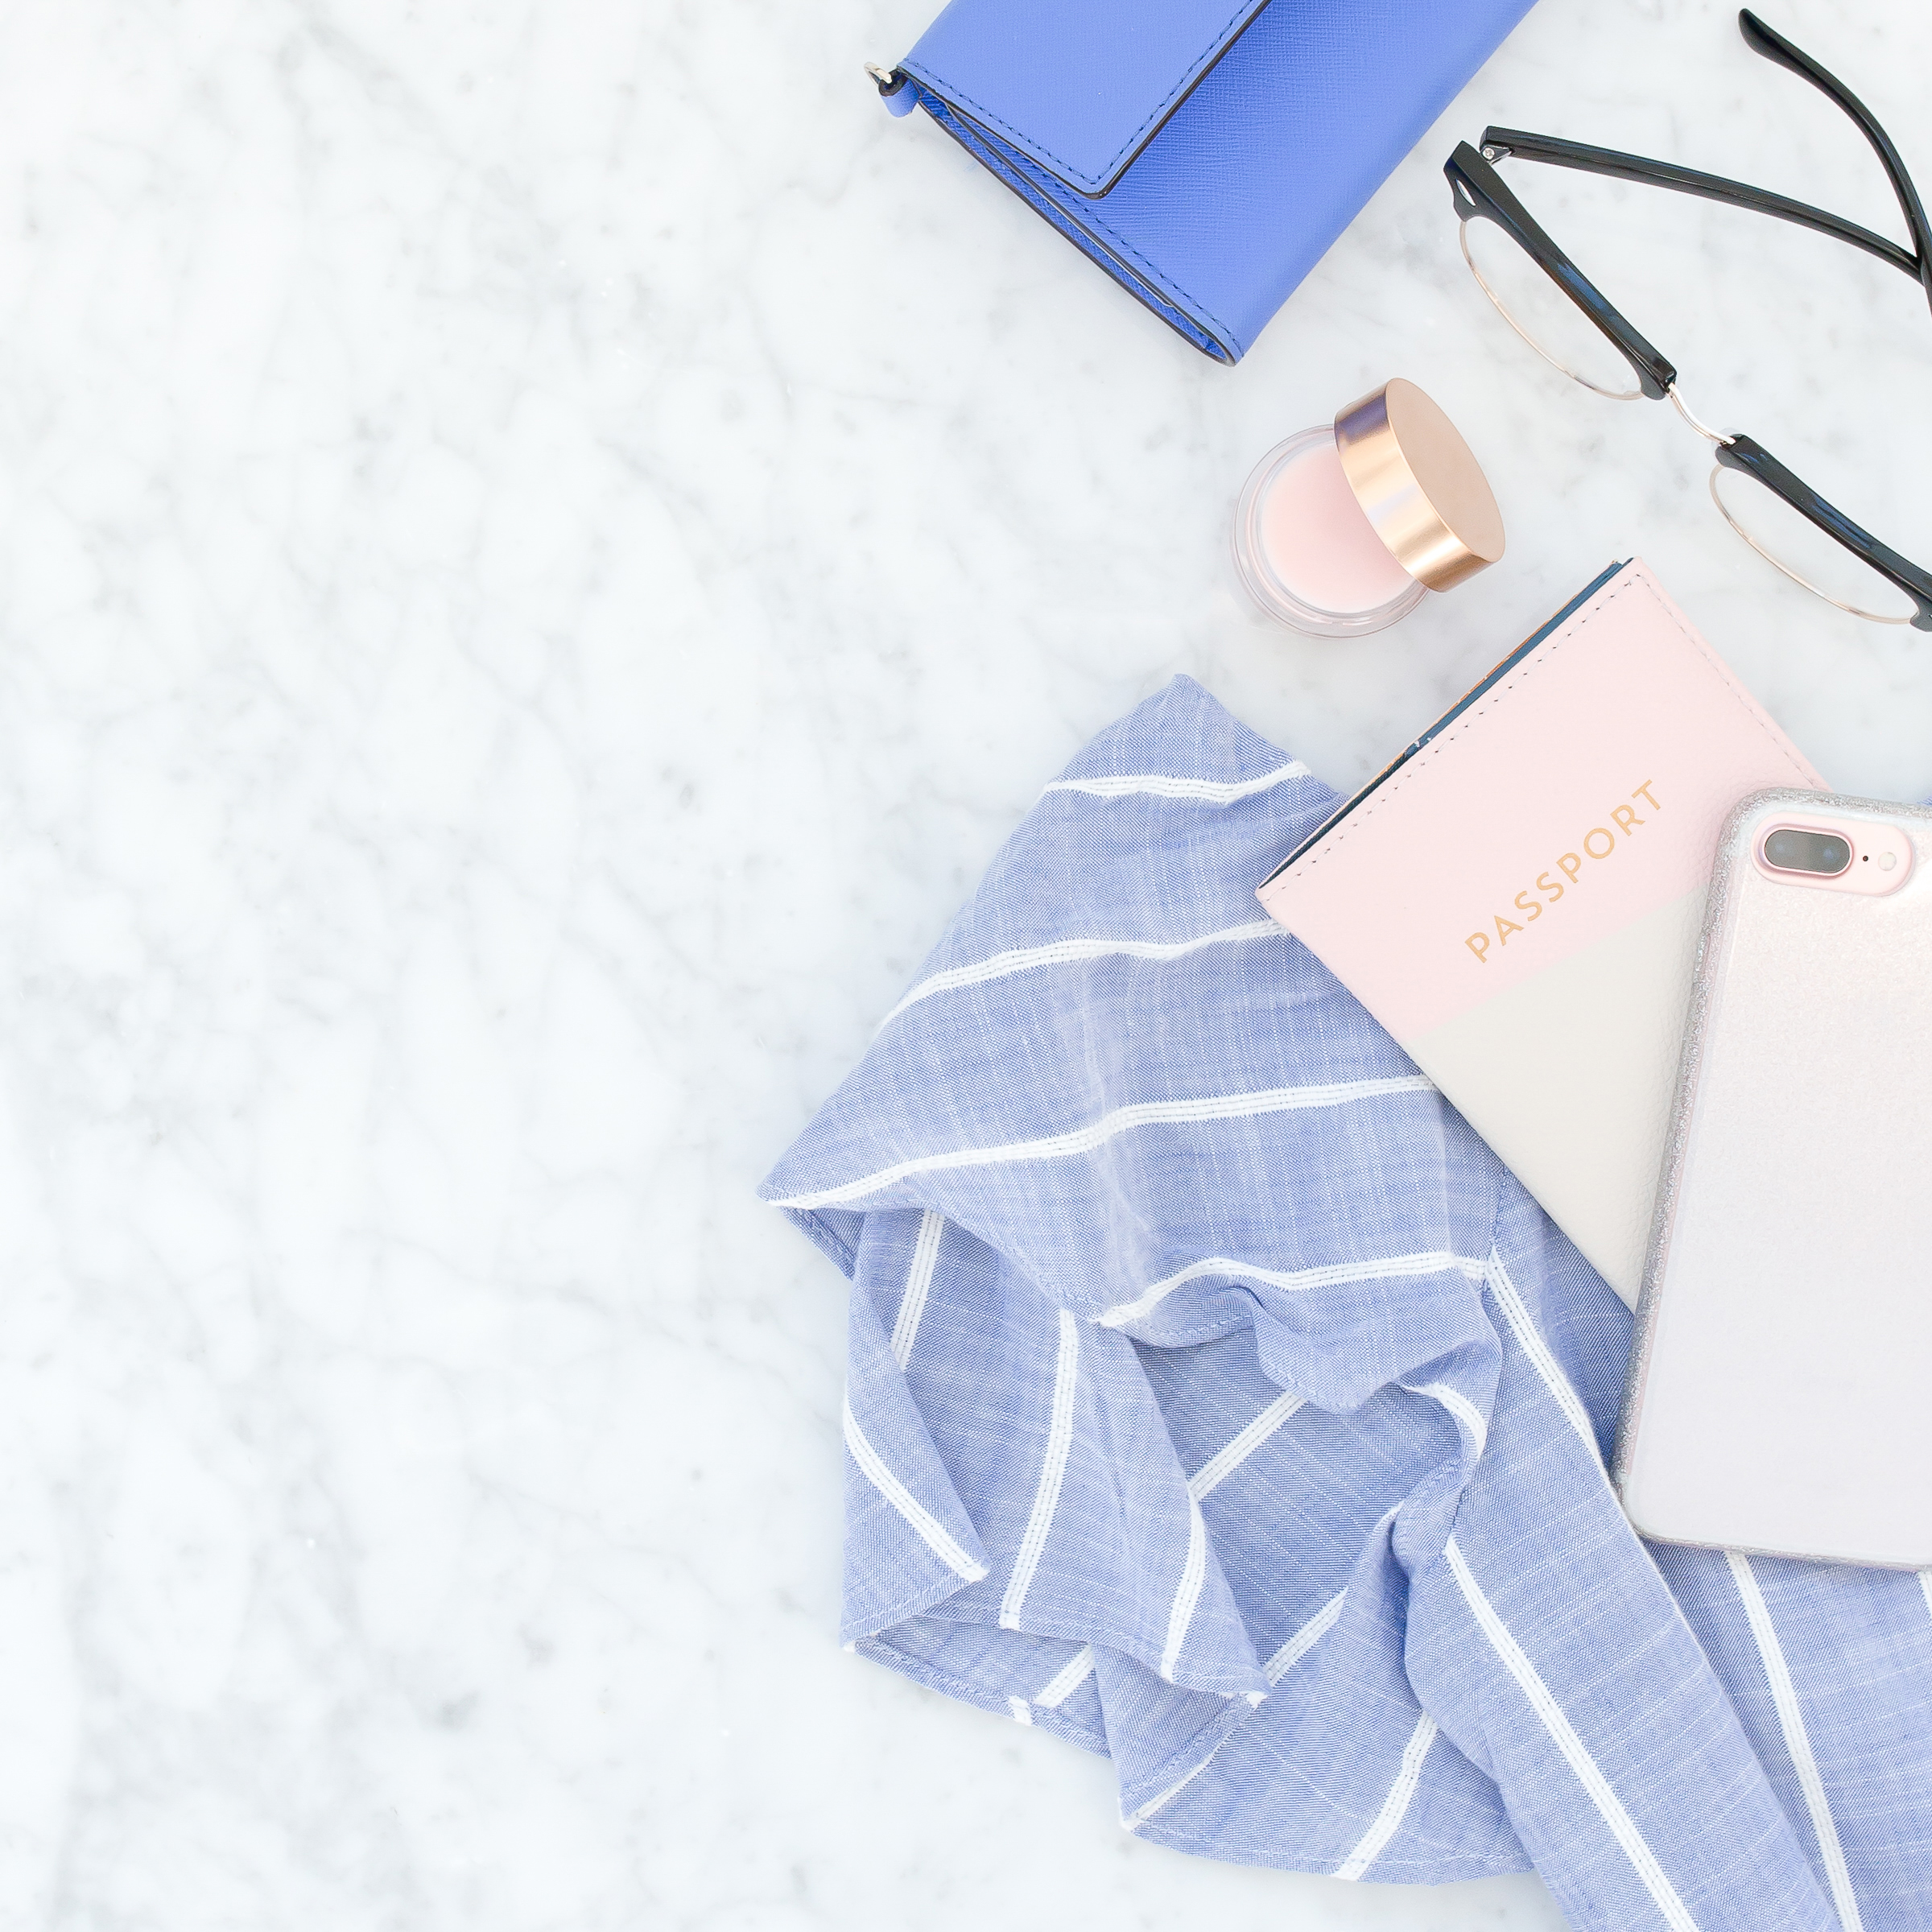 flat lay style image with a blue striped shirt, pink passport, an iphone, glasses, and a few other pink and blue accessory items